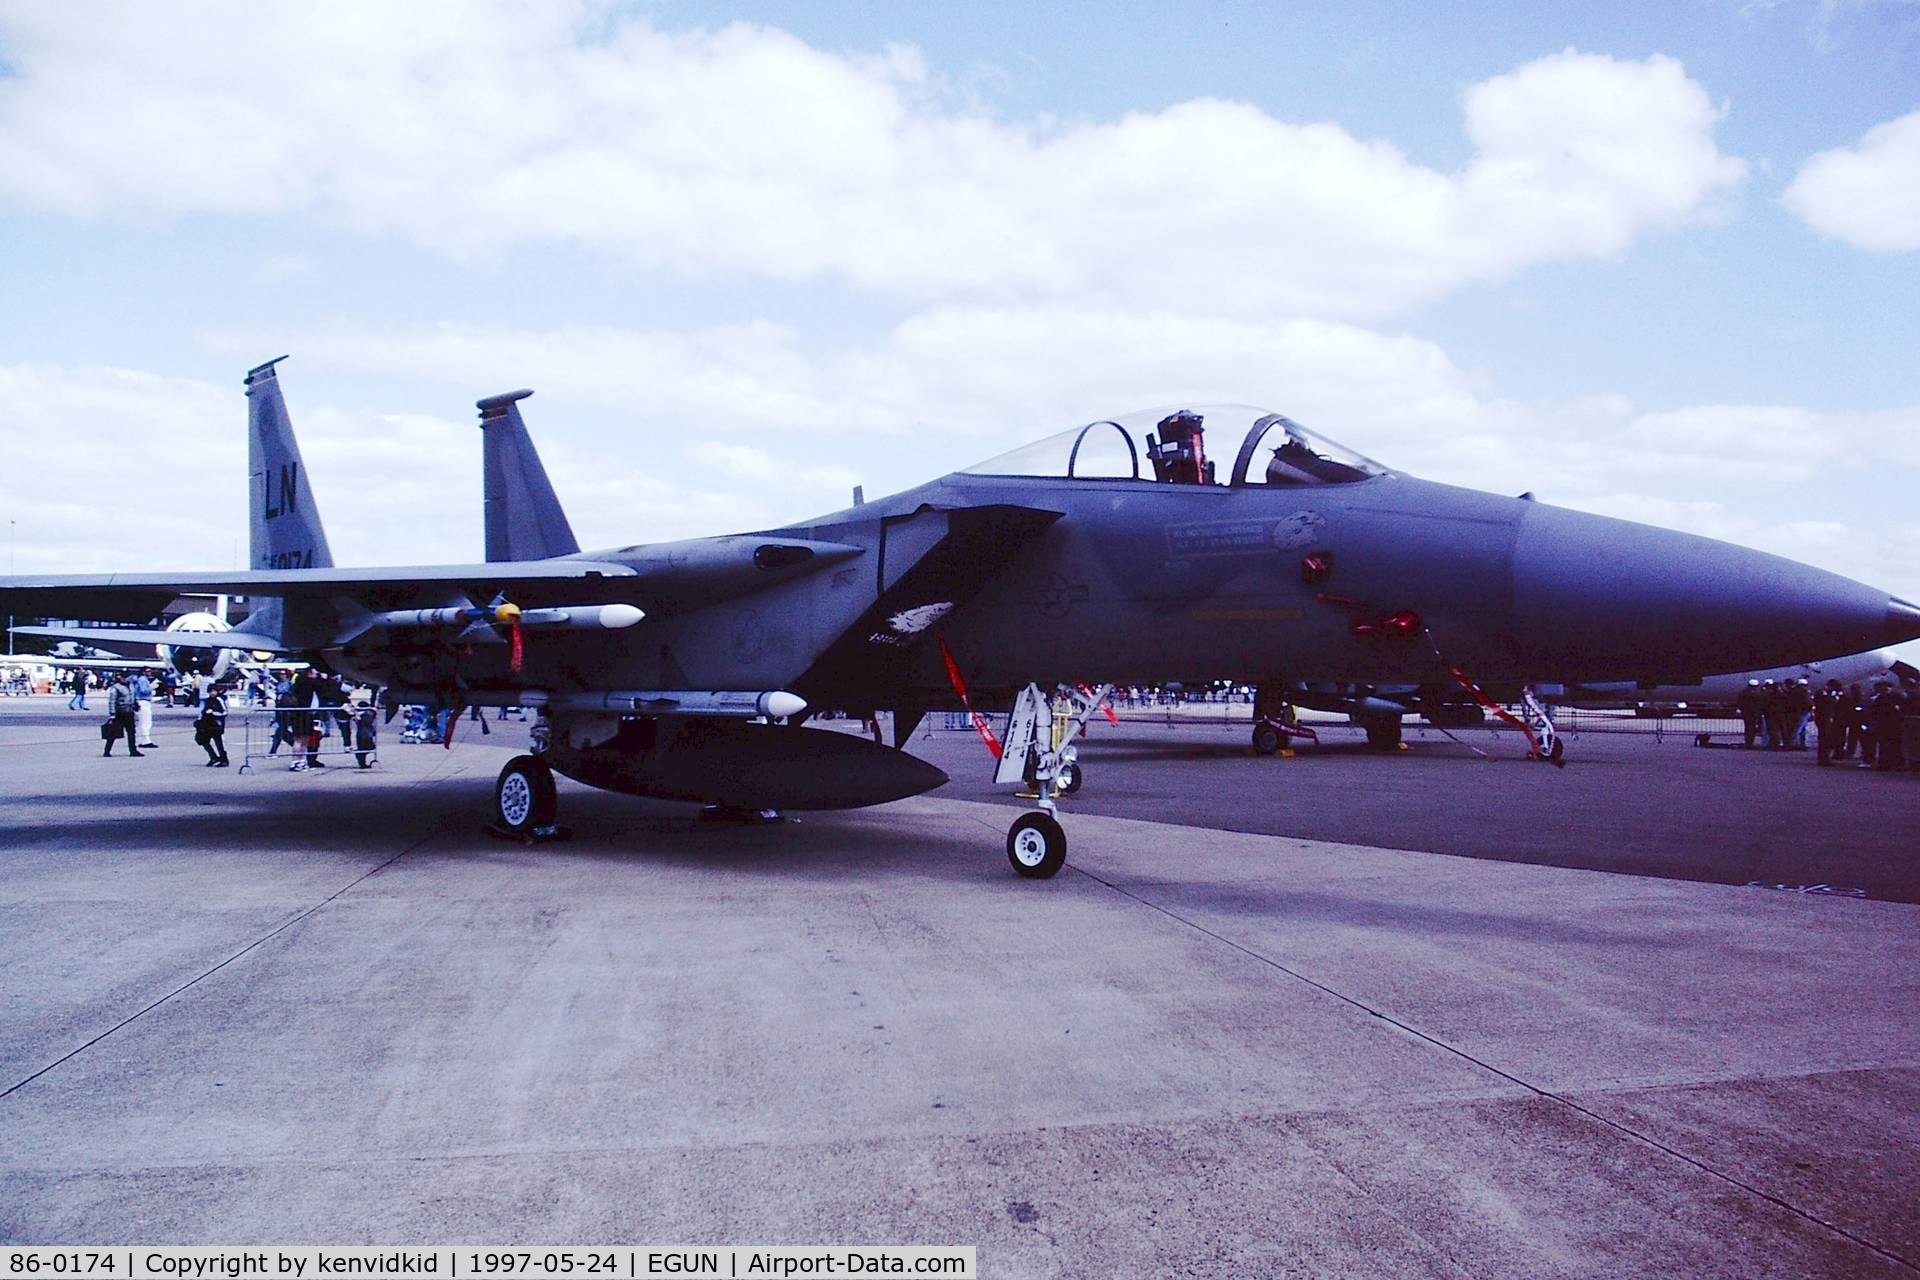 86-0174, 1986 McDonnell Douglas F-15C Eagle C/N 1024/C402, At the 1997 Mildenhall Air Fete.